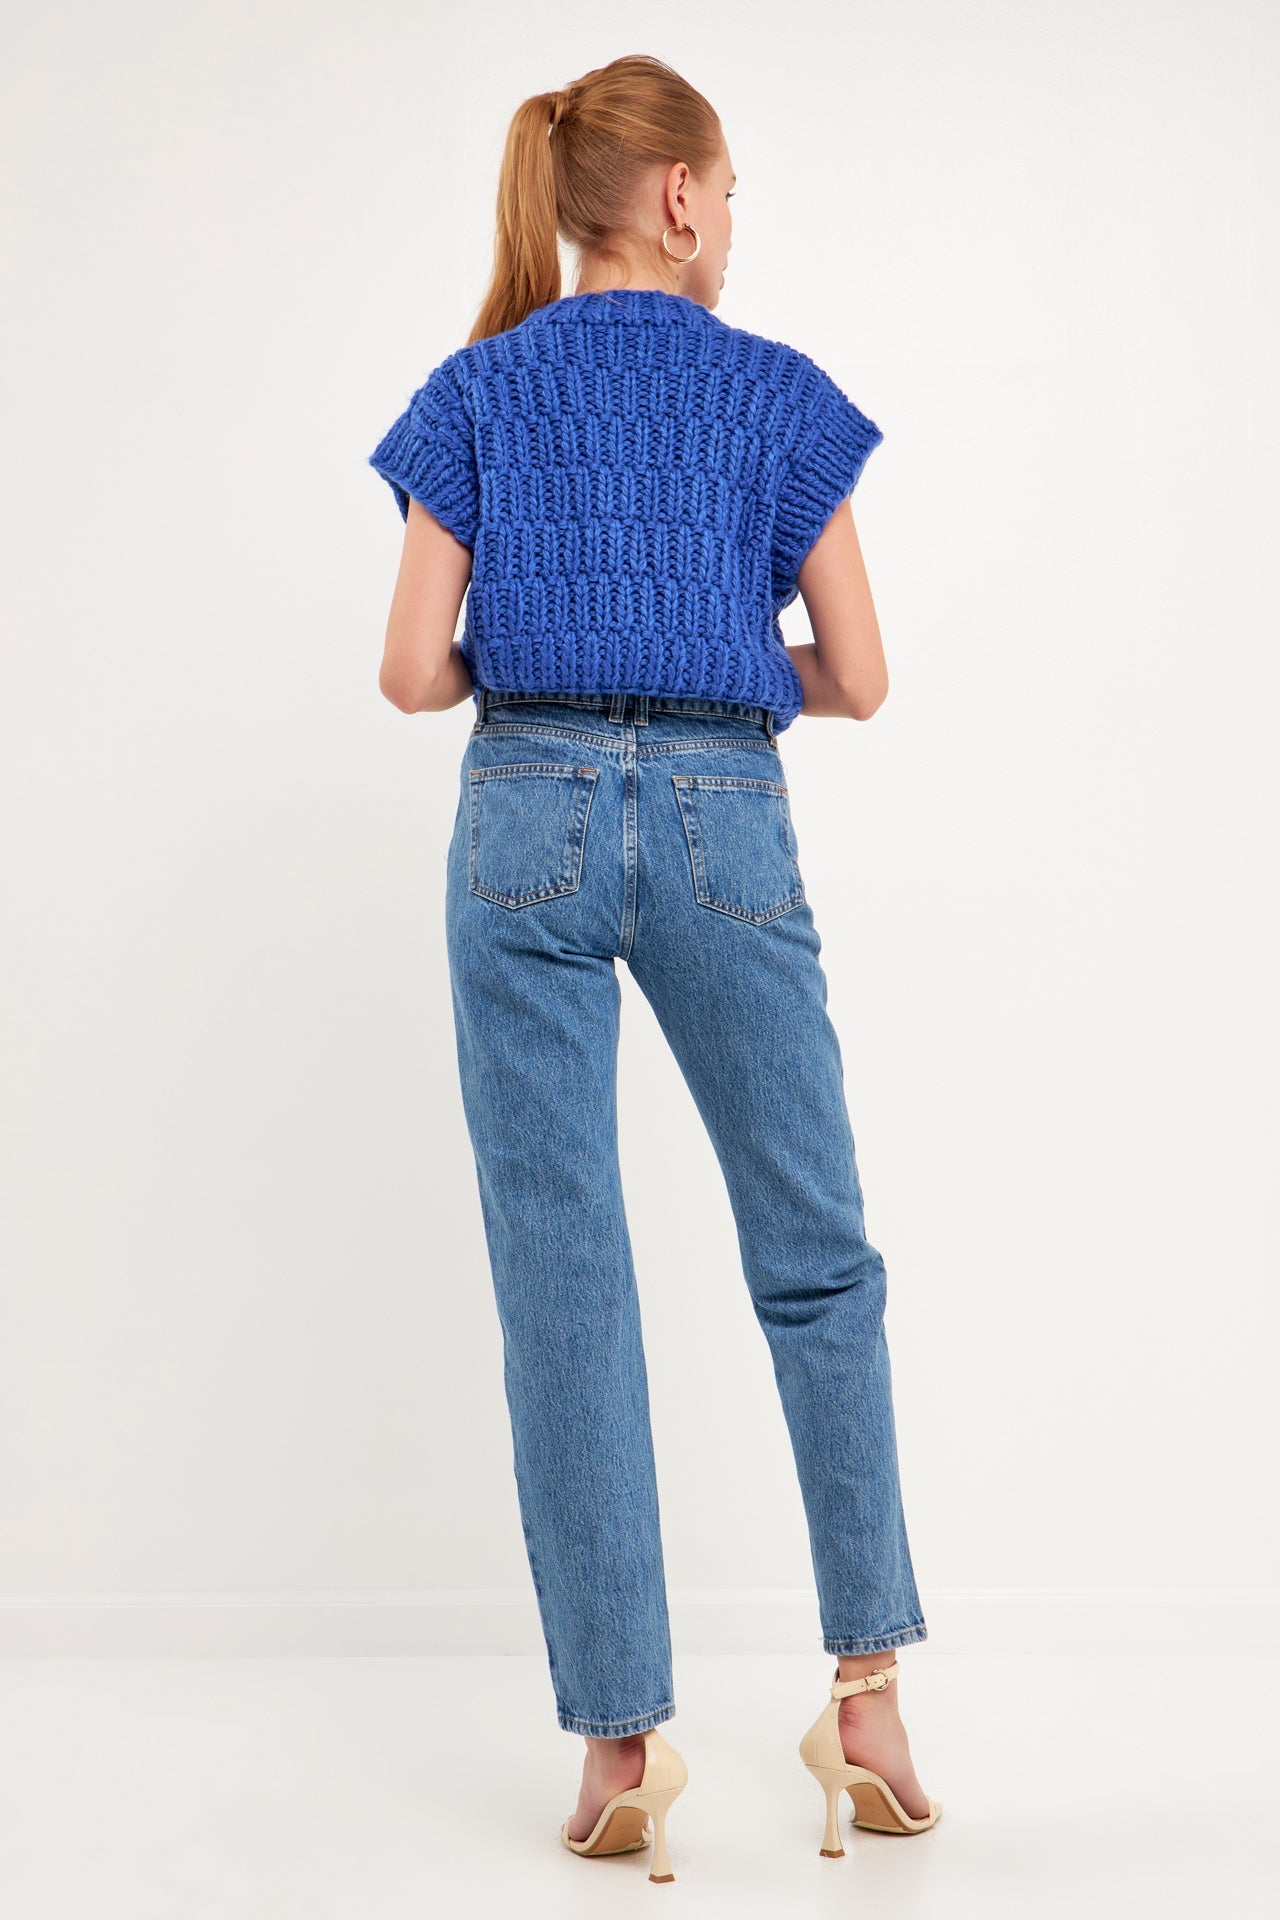 ENGLISH FACTORY-Chunky Knit Sweater Vest-SWEATERS & KNITS available at Objectrare